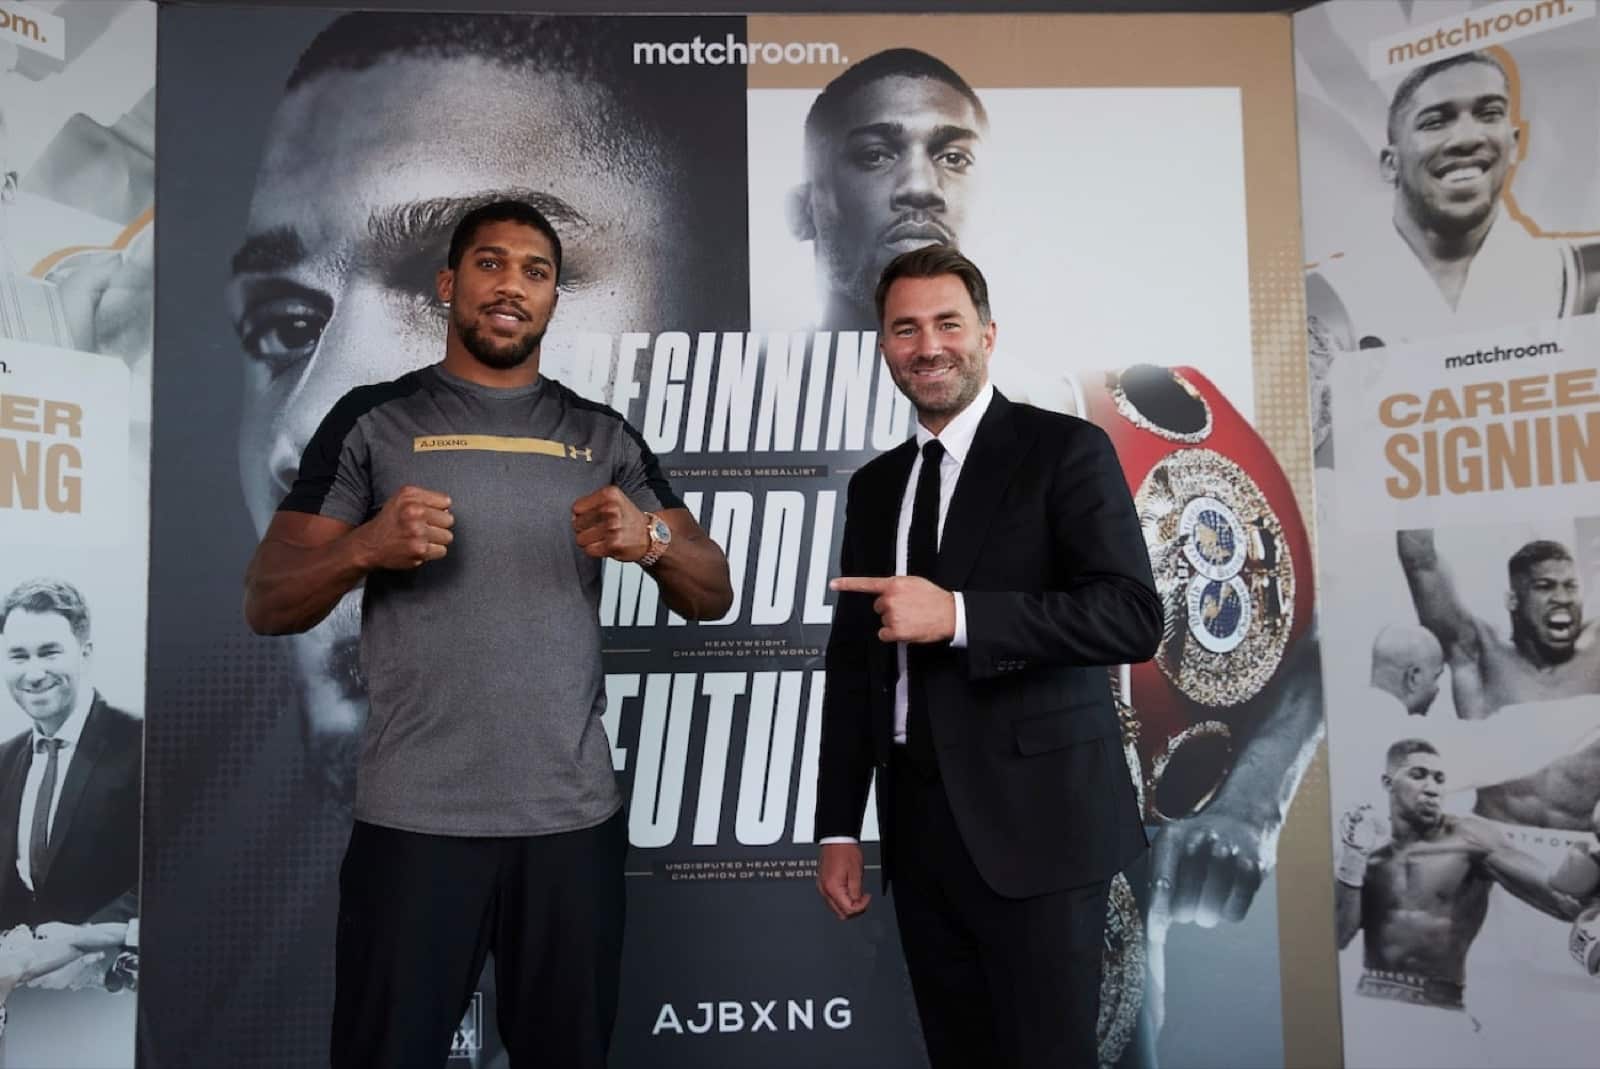 Eddie Hearn says Jermaine Franklin can earn Joshua fight if he beats Whyte on Nov.26th